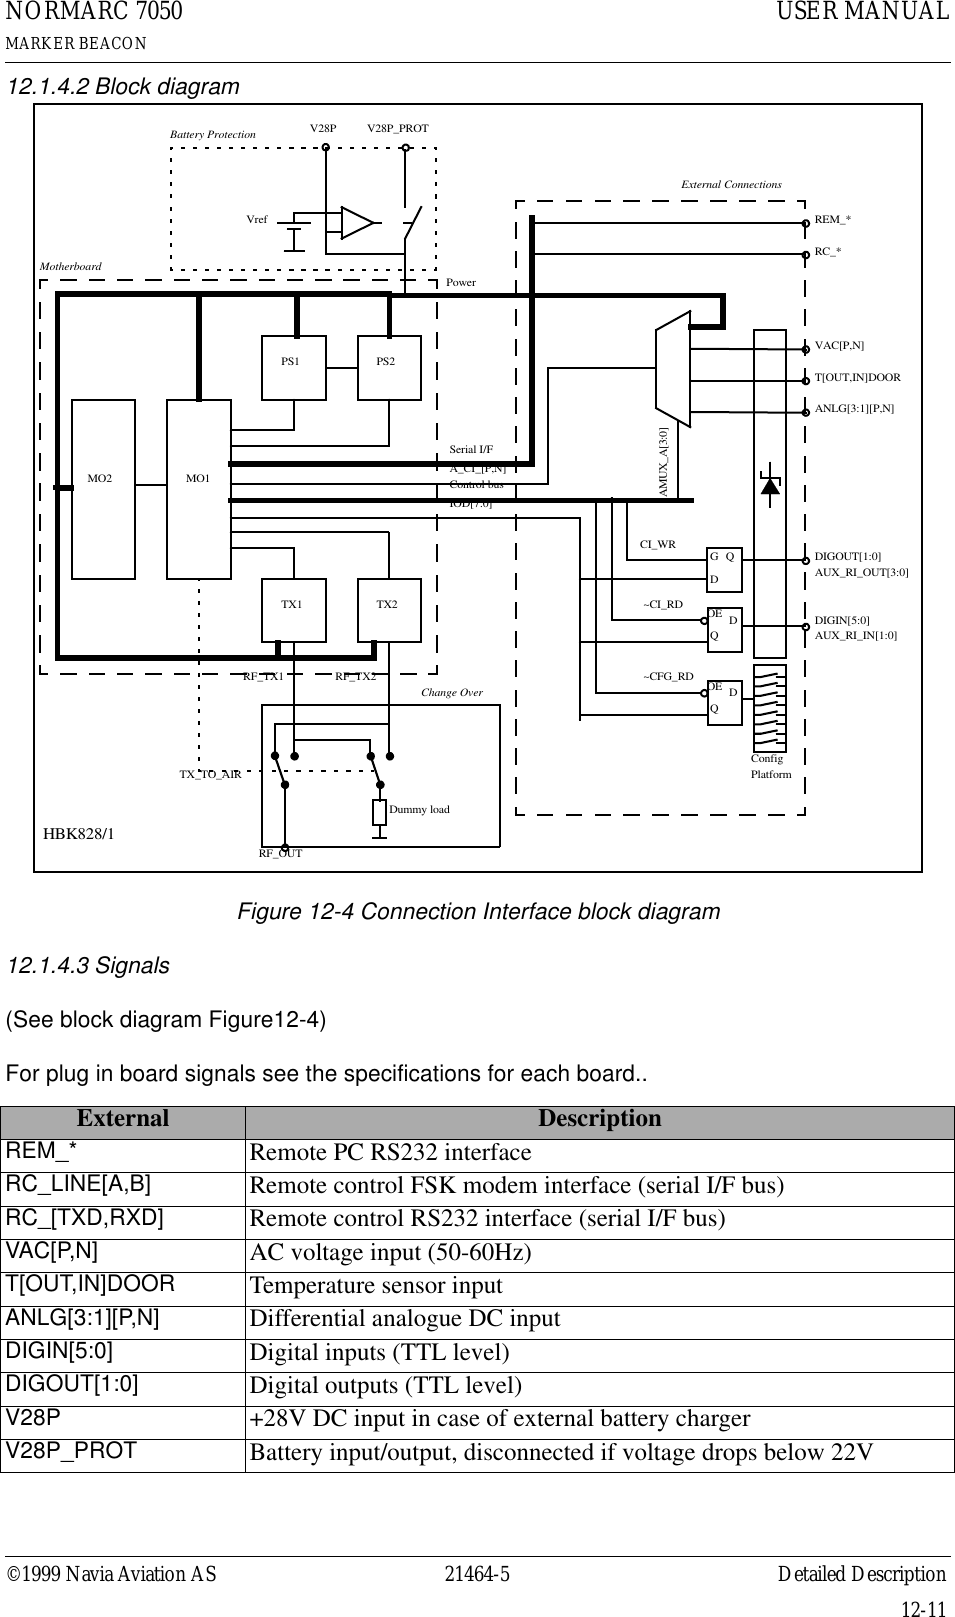 ©1999 Navia Aviation AS 21464-5 Detailed DescriptionUSER MANUALNORMARC 7050MARKER BEACON12-1112.1.4.2 Block diagramFigure 12-4 Connection Interface block diagram12.1.4.3 Signals(See block diagram Figure12-4)For plug in board signals see the specifications for each board..External DescriptionREM_* Remote PC RS232 interfaceRC_LINE[A,B] Remote control FSK modem interface (serial I/F bus)RC_[TXD,RXD] Remote control RS232 interface (serial I/F bus)VAC[P,N] AC voltage input (50-60Hz)T[OUT,IN]DOOR Temperature sensor inputANLG[3:1][P,N] Differential analogue DC inputDIGIN[5:0] Digital inputs (TTL level)DIGOUT[1:0] Digital outputs (TTL level)V28P +28V DC input in case of external battery chargerV28P_PROT Battery input/output, disconnected if voltage drops below 22VPS1 PS2MO2 MO1TX1 TX2REM_* RC_*VAC[P,N]T[OUT,IN]DOORANLG[3:1][P,N]DIGIN[5:0]AUX_RI_IN[1:0]DIGOUT[1:0]AUX_RI_OUT[3:0]RF_OUTRF_TX1 RF_TX2V28P V28P_PROTVrefIOD[7:0]Control busA_CI_[P,N]Serial I/FPowerGQDQDMotherboardBattery ProtectionExternal ConnectionsChange OverCI_WR~CI_RD OEAMUX_A[3:0]Dummy loadTX_TO_AIRQD~CFG_RD OEConfigPlatformHBK828/1